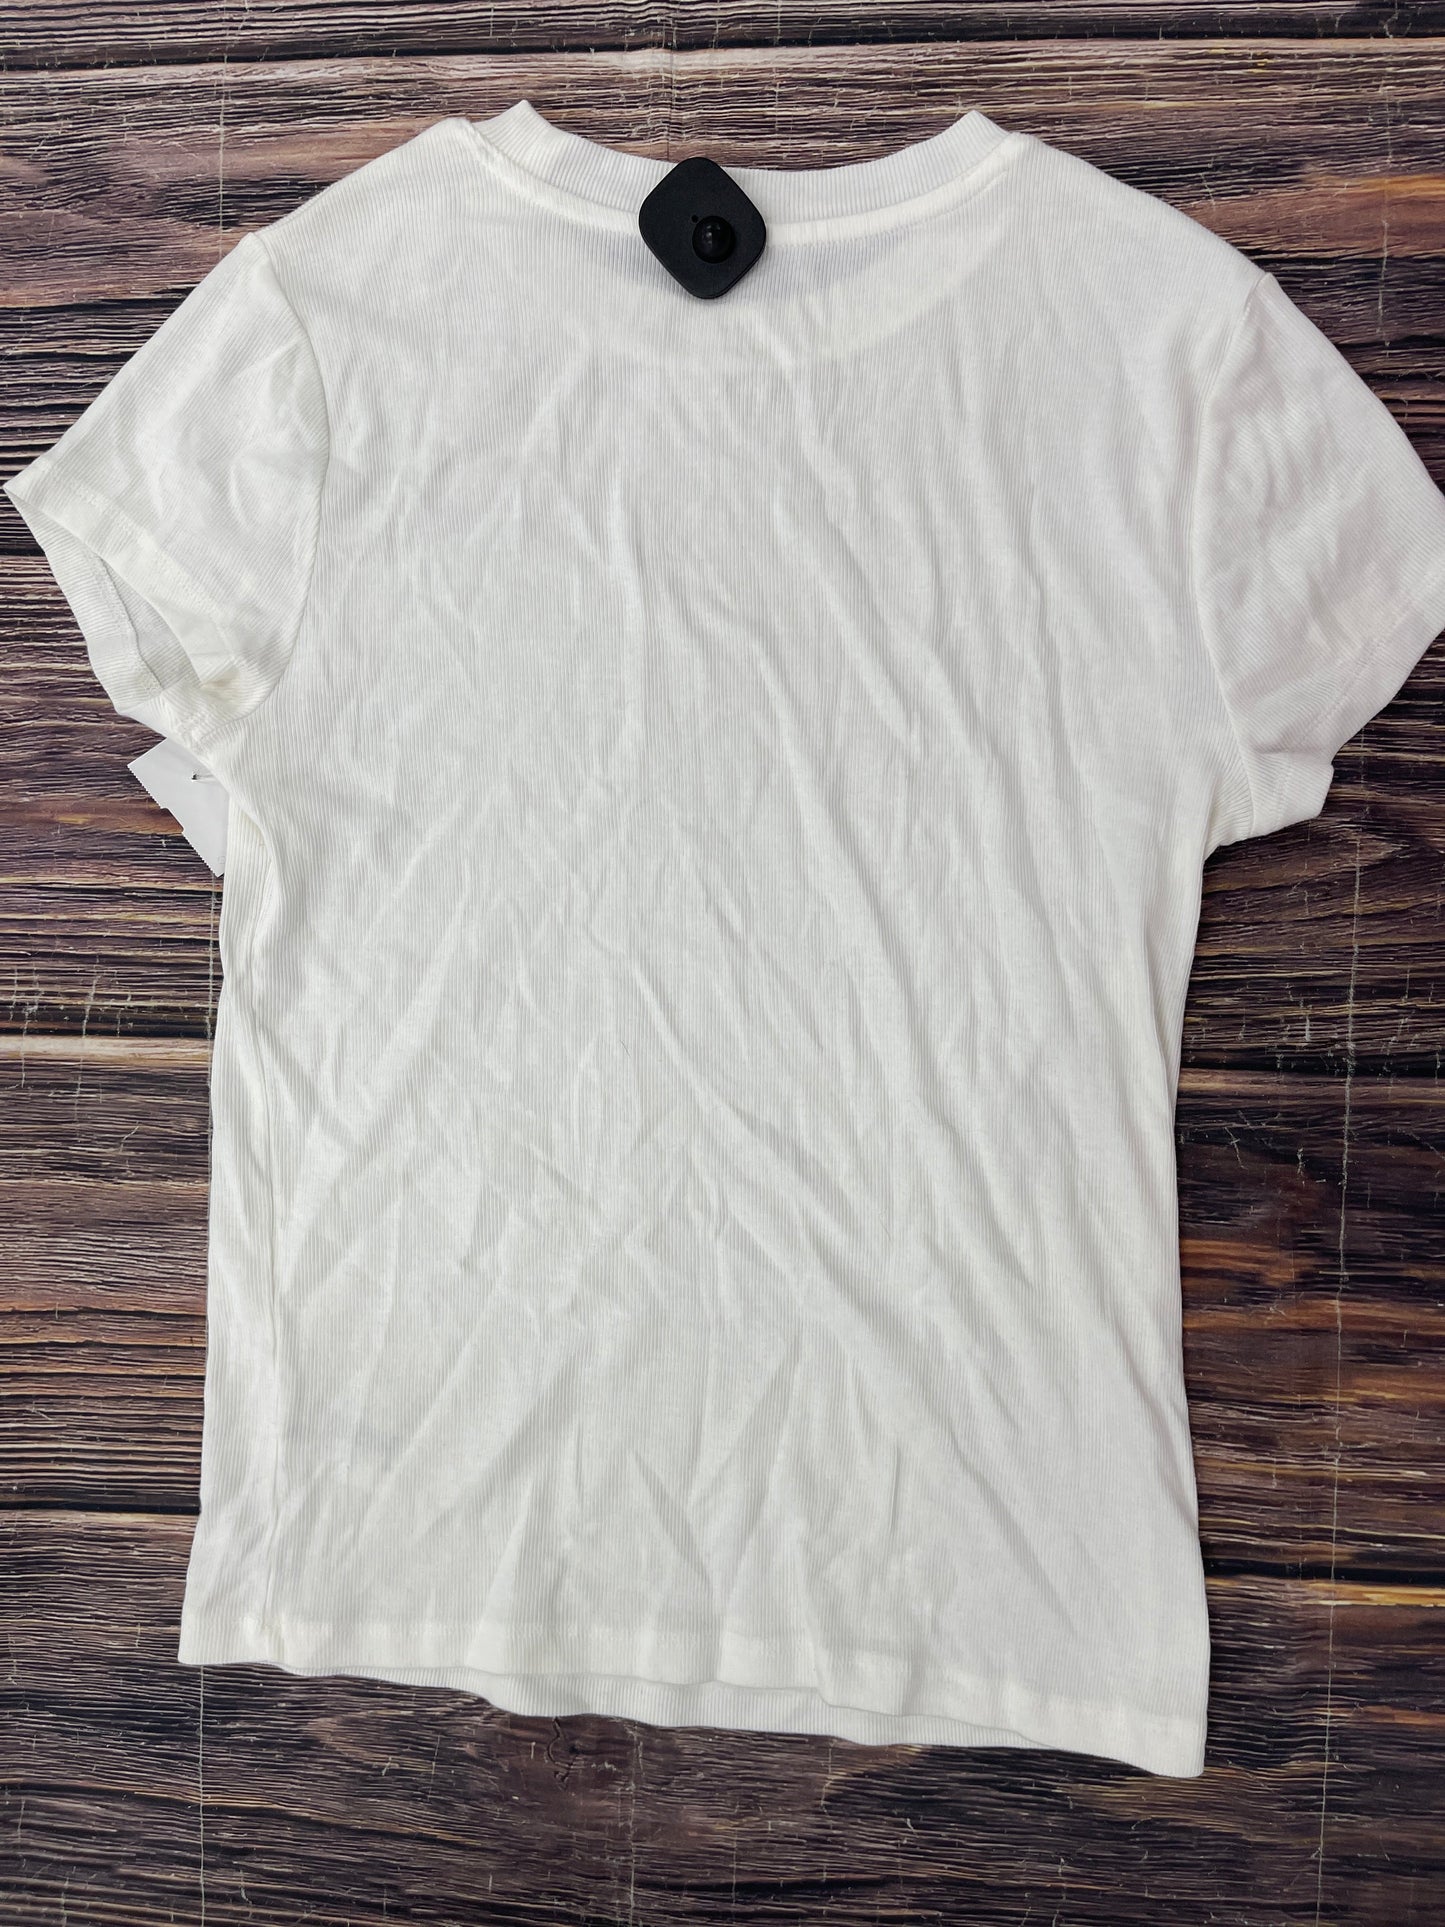 White Top Short Sleeve Basic A New Day, Size L